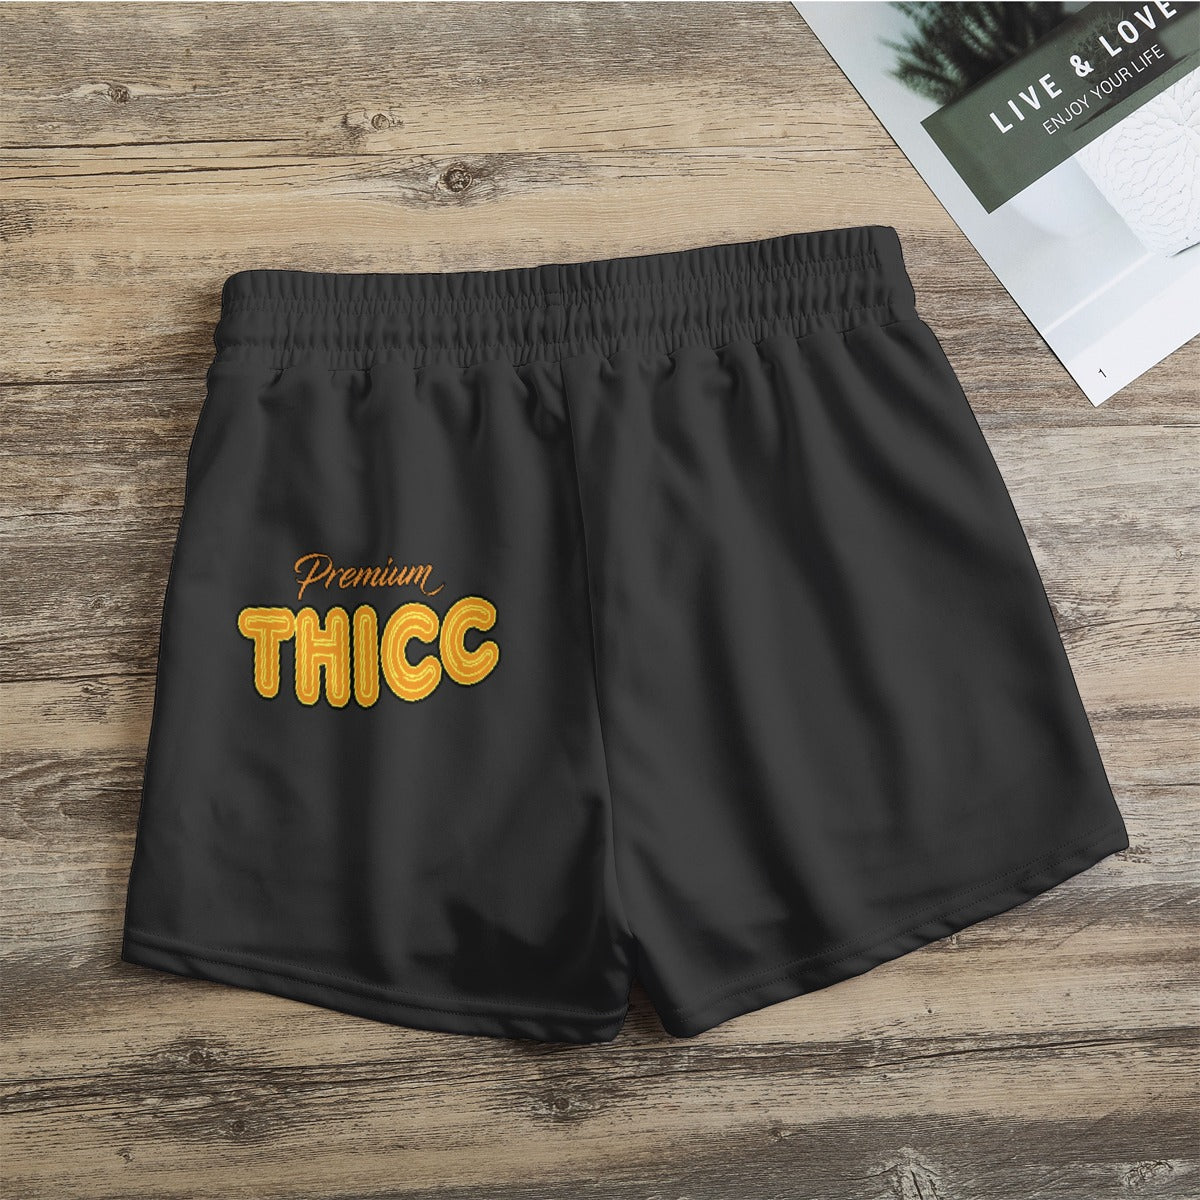 Royal Gold Premium Thicc Women's Casual Shorts